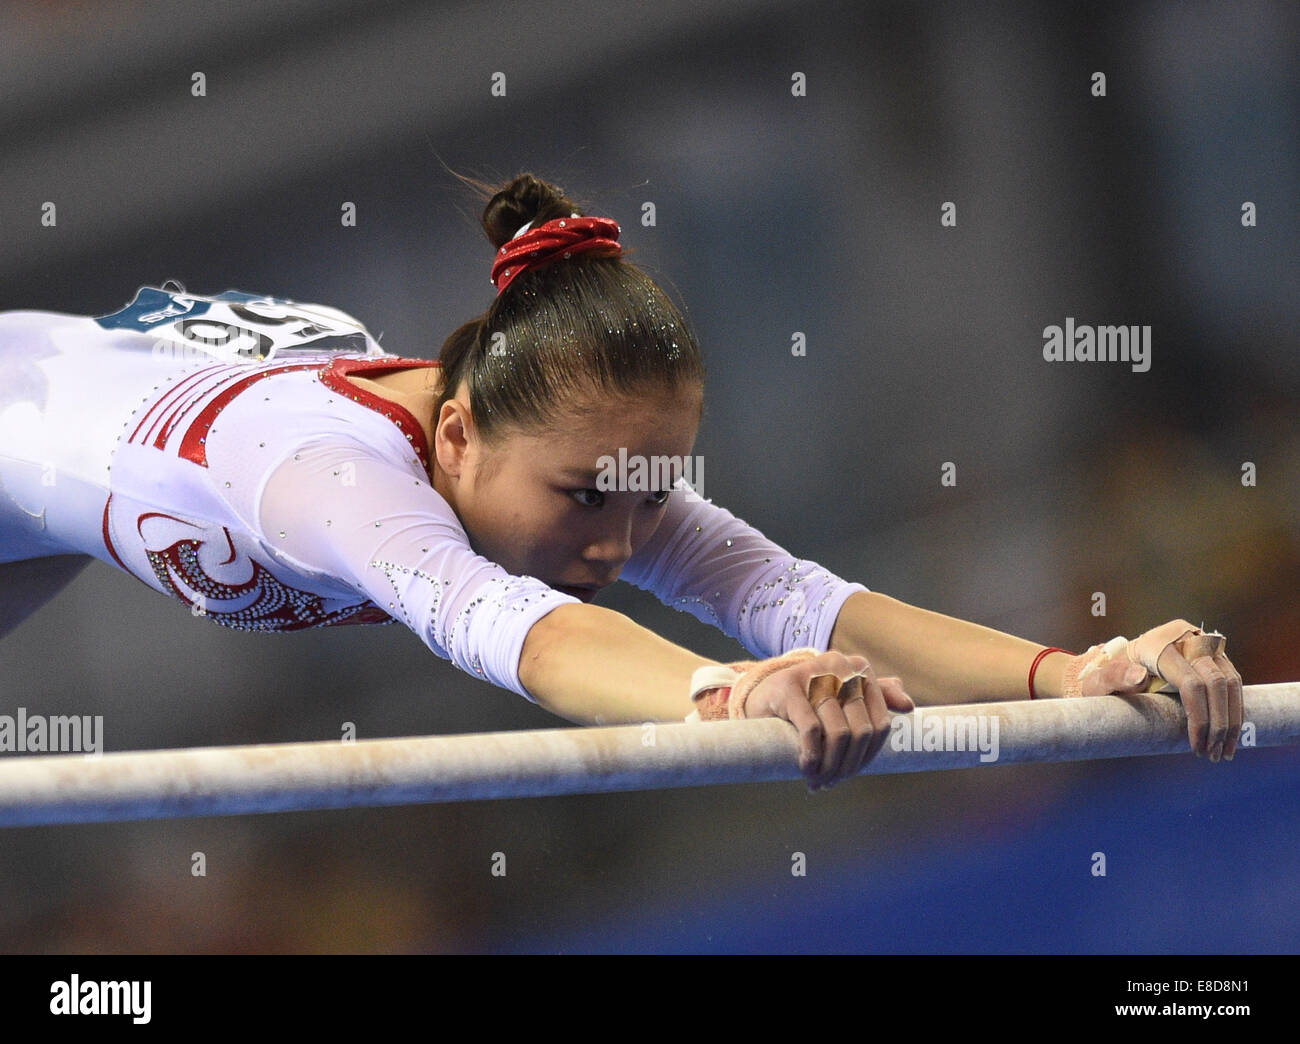 Nanning, China's Guangxi Zhuang Autonomous Region. 6th Oct, 2014. Chinese gymnast Yao Jinnan performs on the uneven bars during the women's qualifying round of the 45th Gymnastics World Championships in Nanning, capital of south China's Guangxi Zhuang Autonomous Region, Oct. 6, 2014. The 45th FIG Artistic Gymnastics World Championships lasts from Oct. 3 to 12 in Nanning. Credit:  Li Qiaoqiao/Xinhua/Alamy Live News Stock Photo